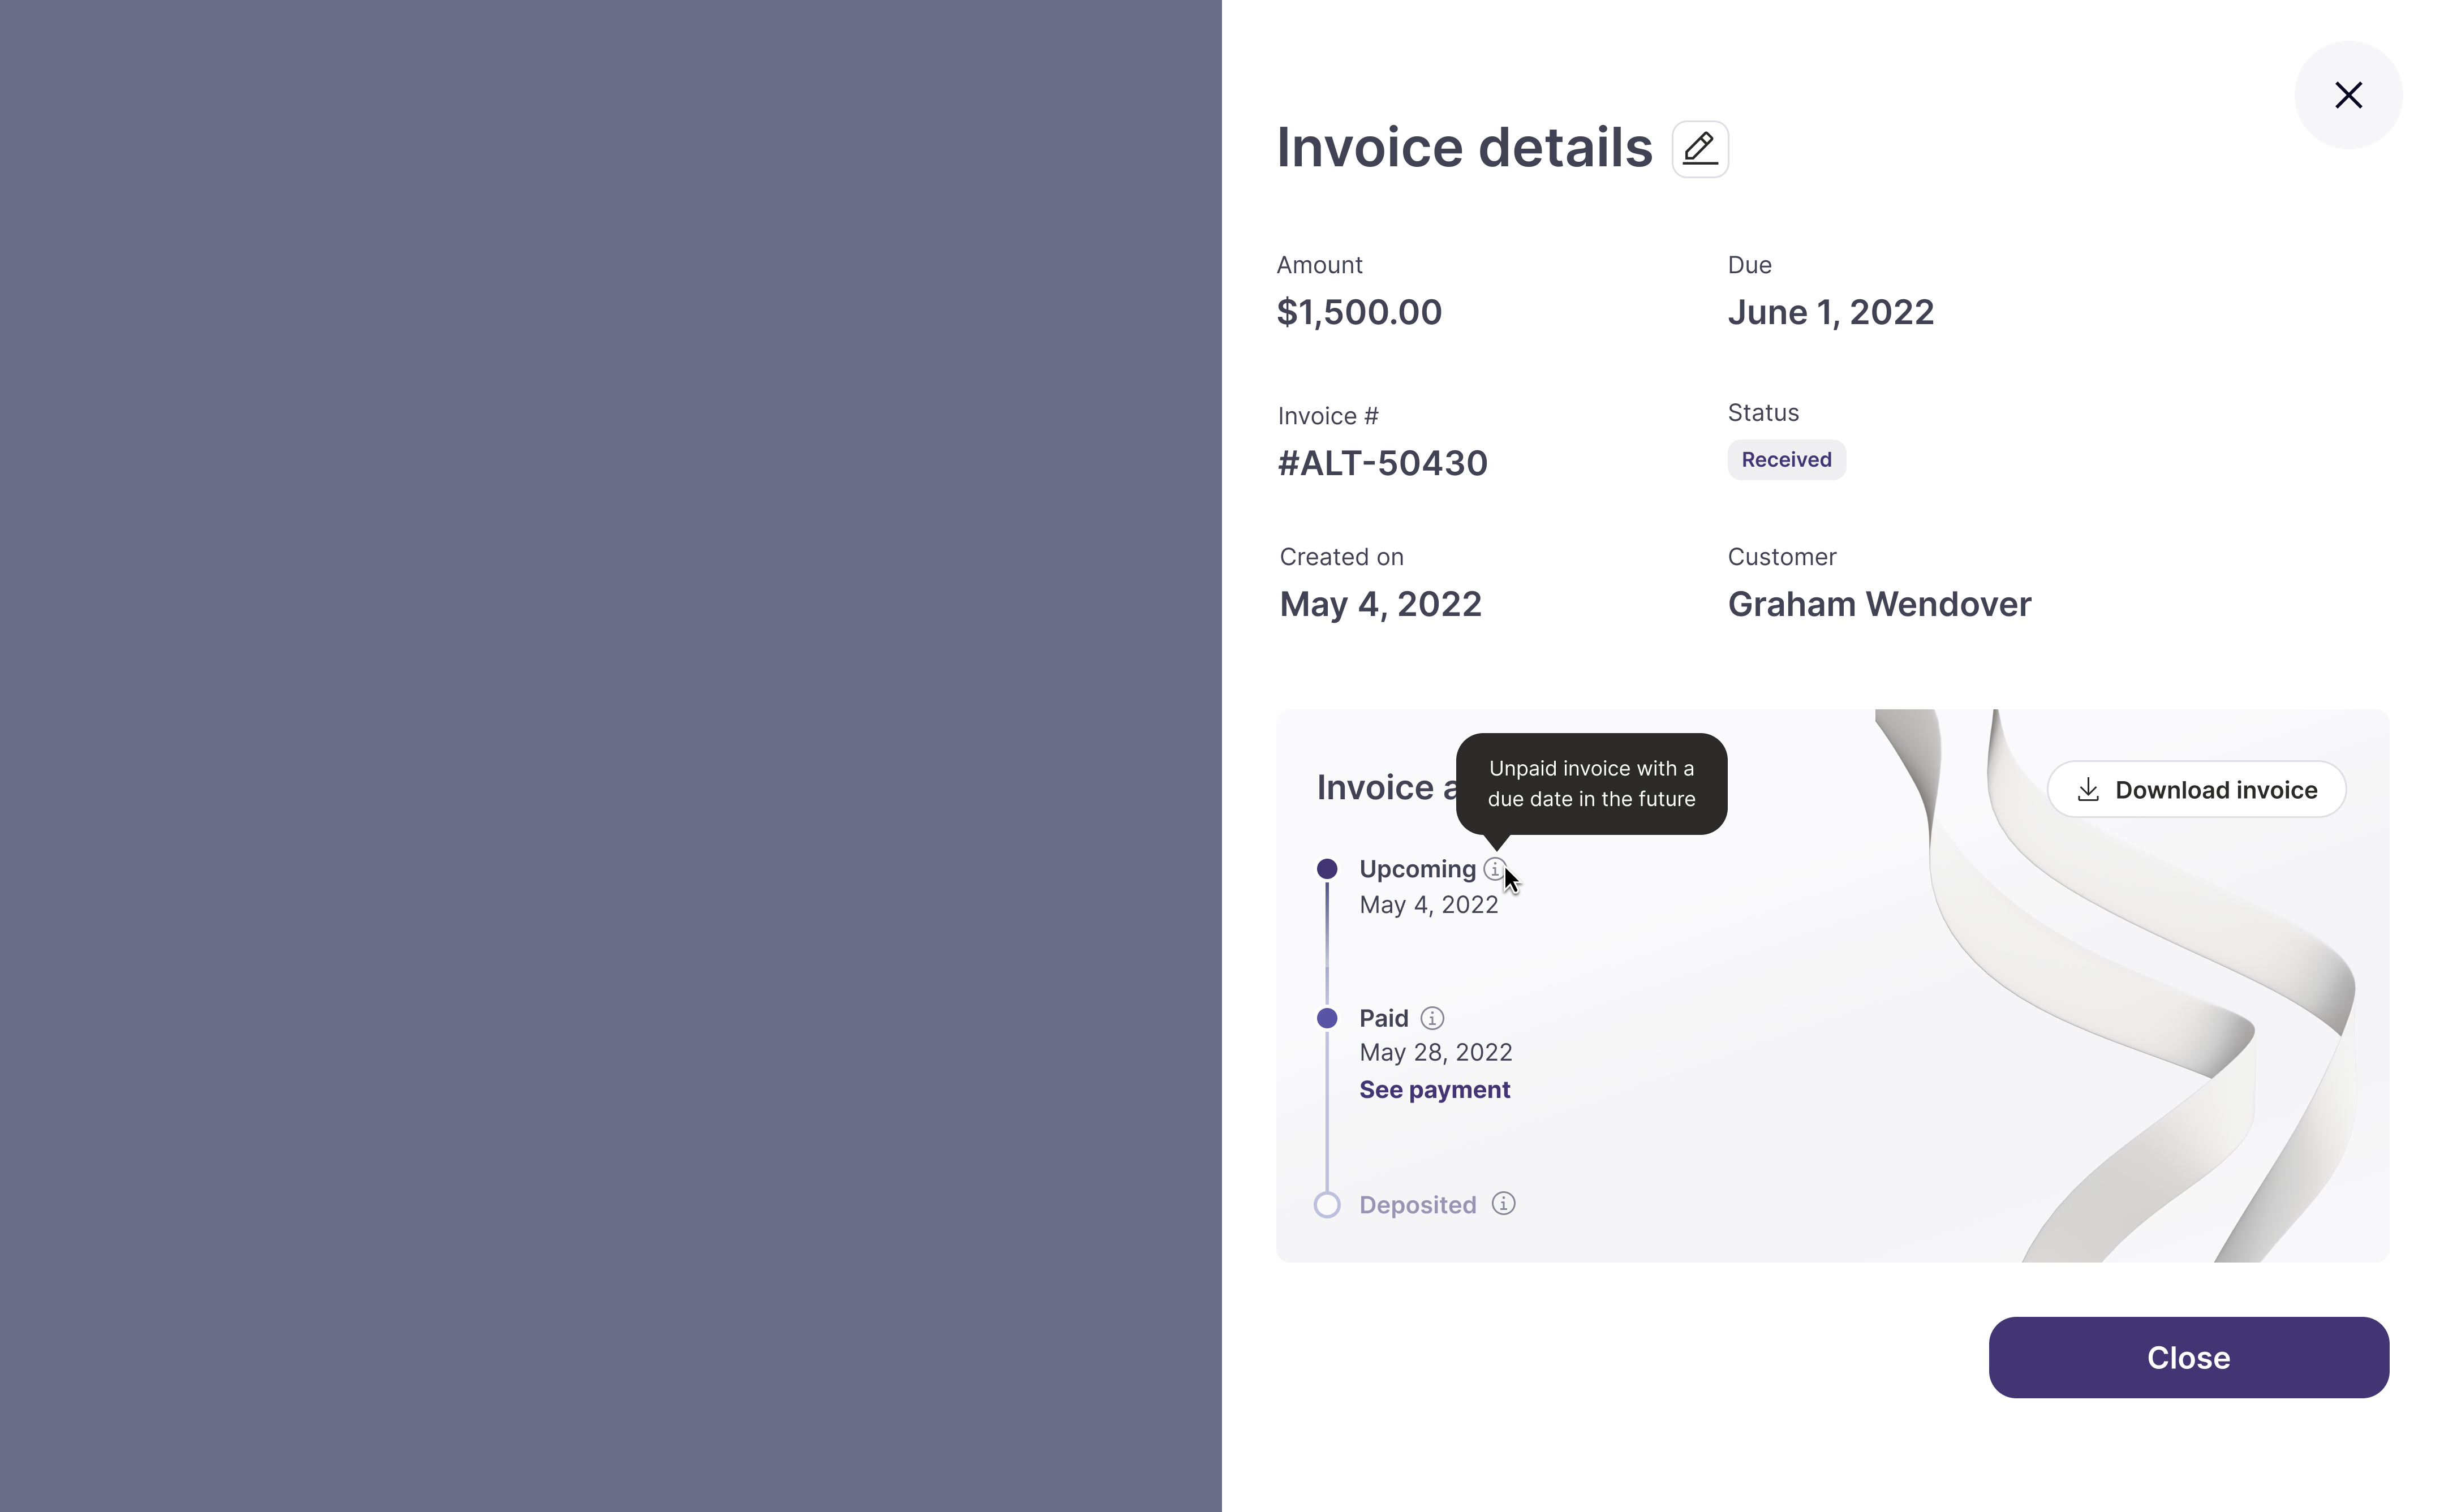 Double-click into Invoice to view details on status, payment issues, and more - and download for easy reconciliation.